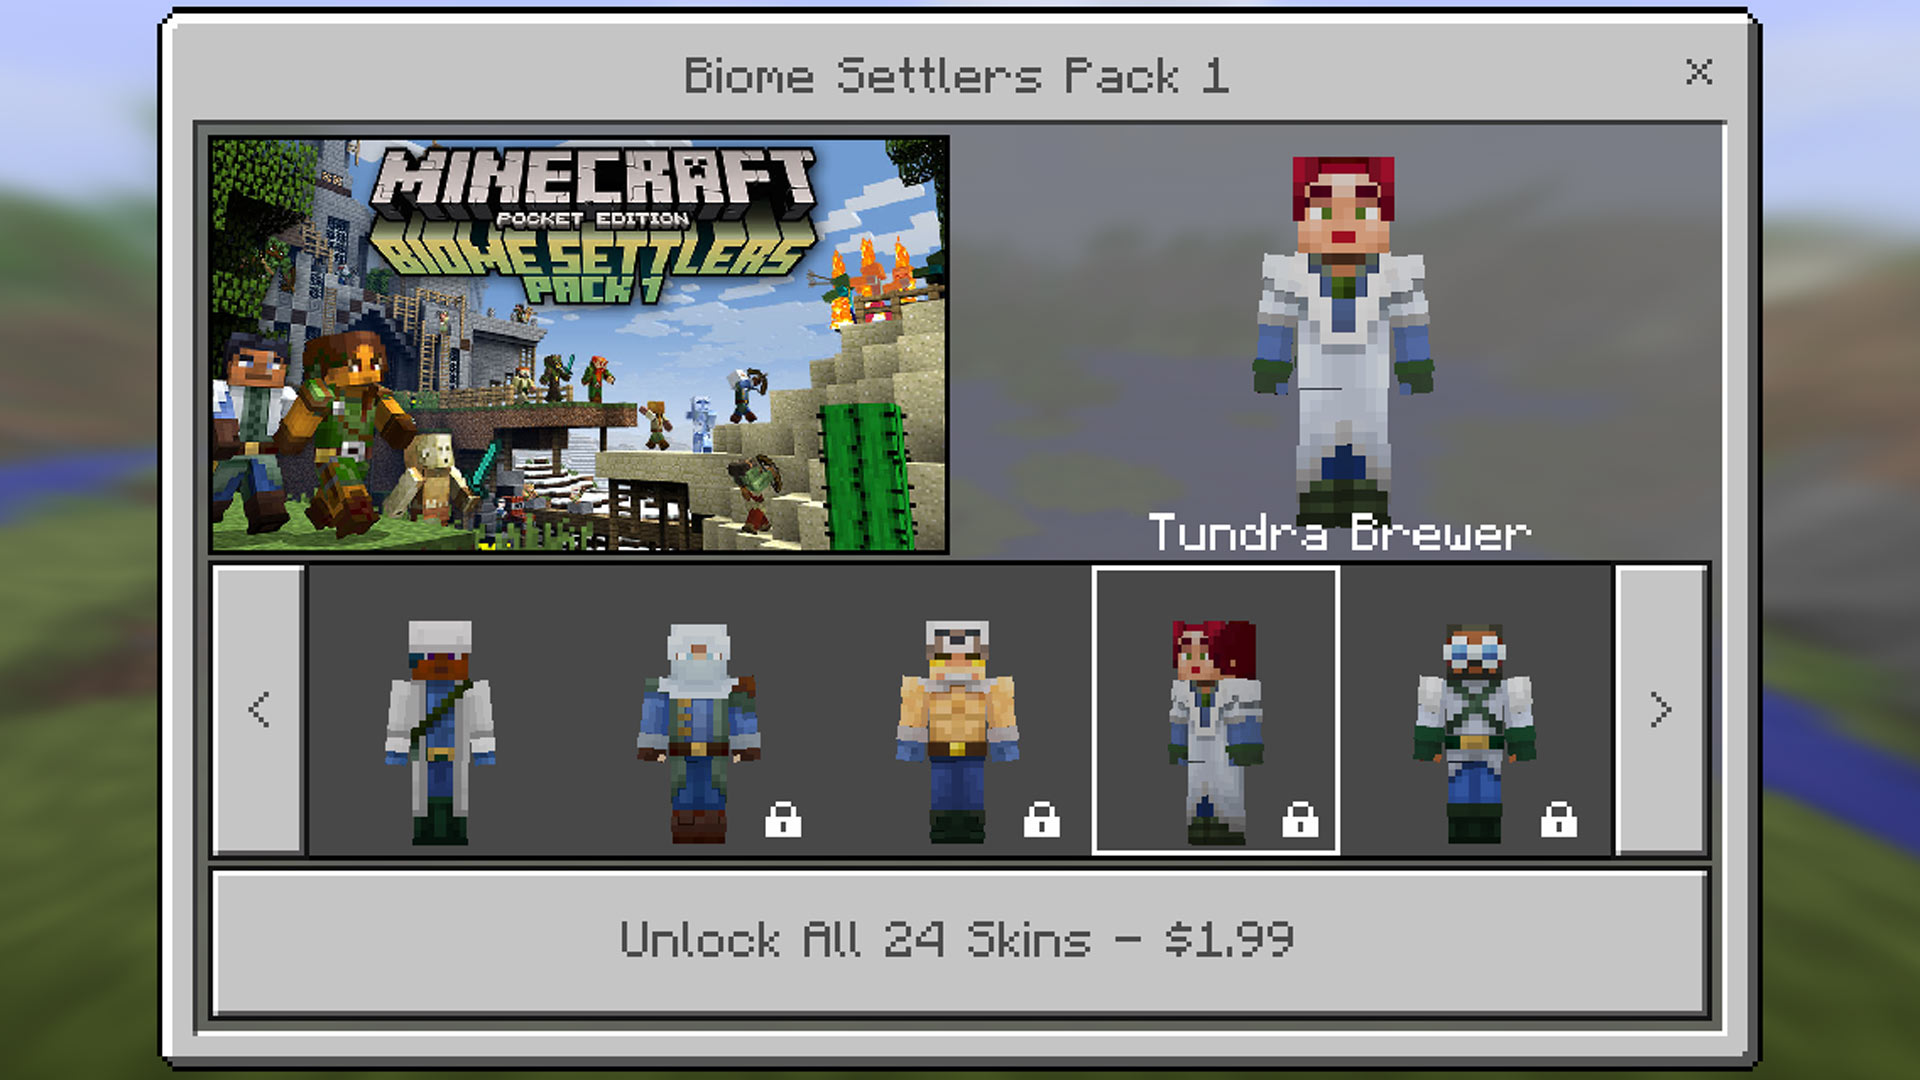 Minecraft Pocket Edition: Biome Settlers Skin Pack